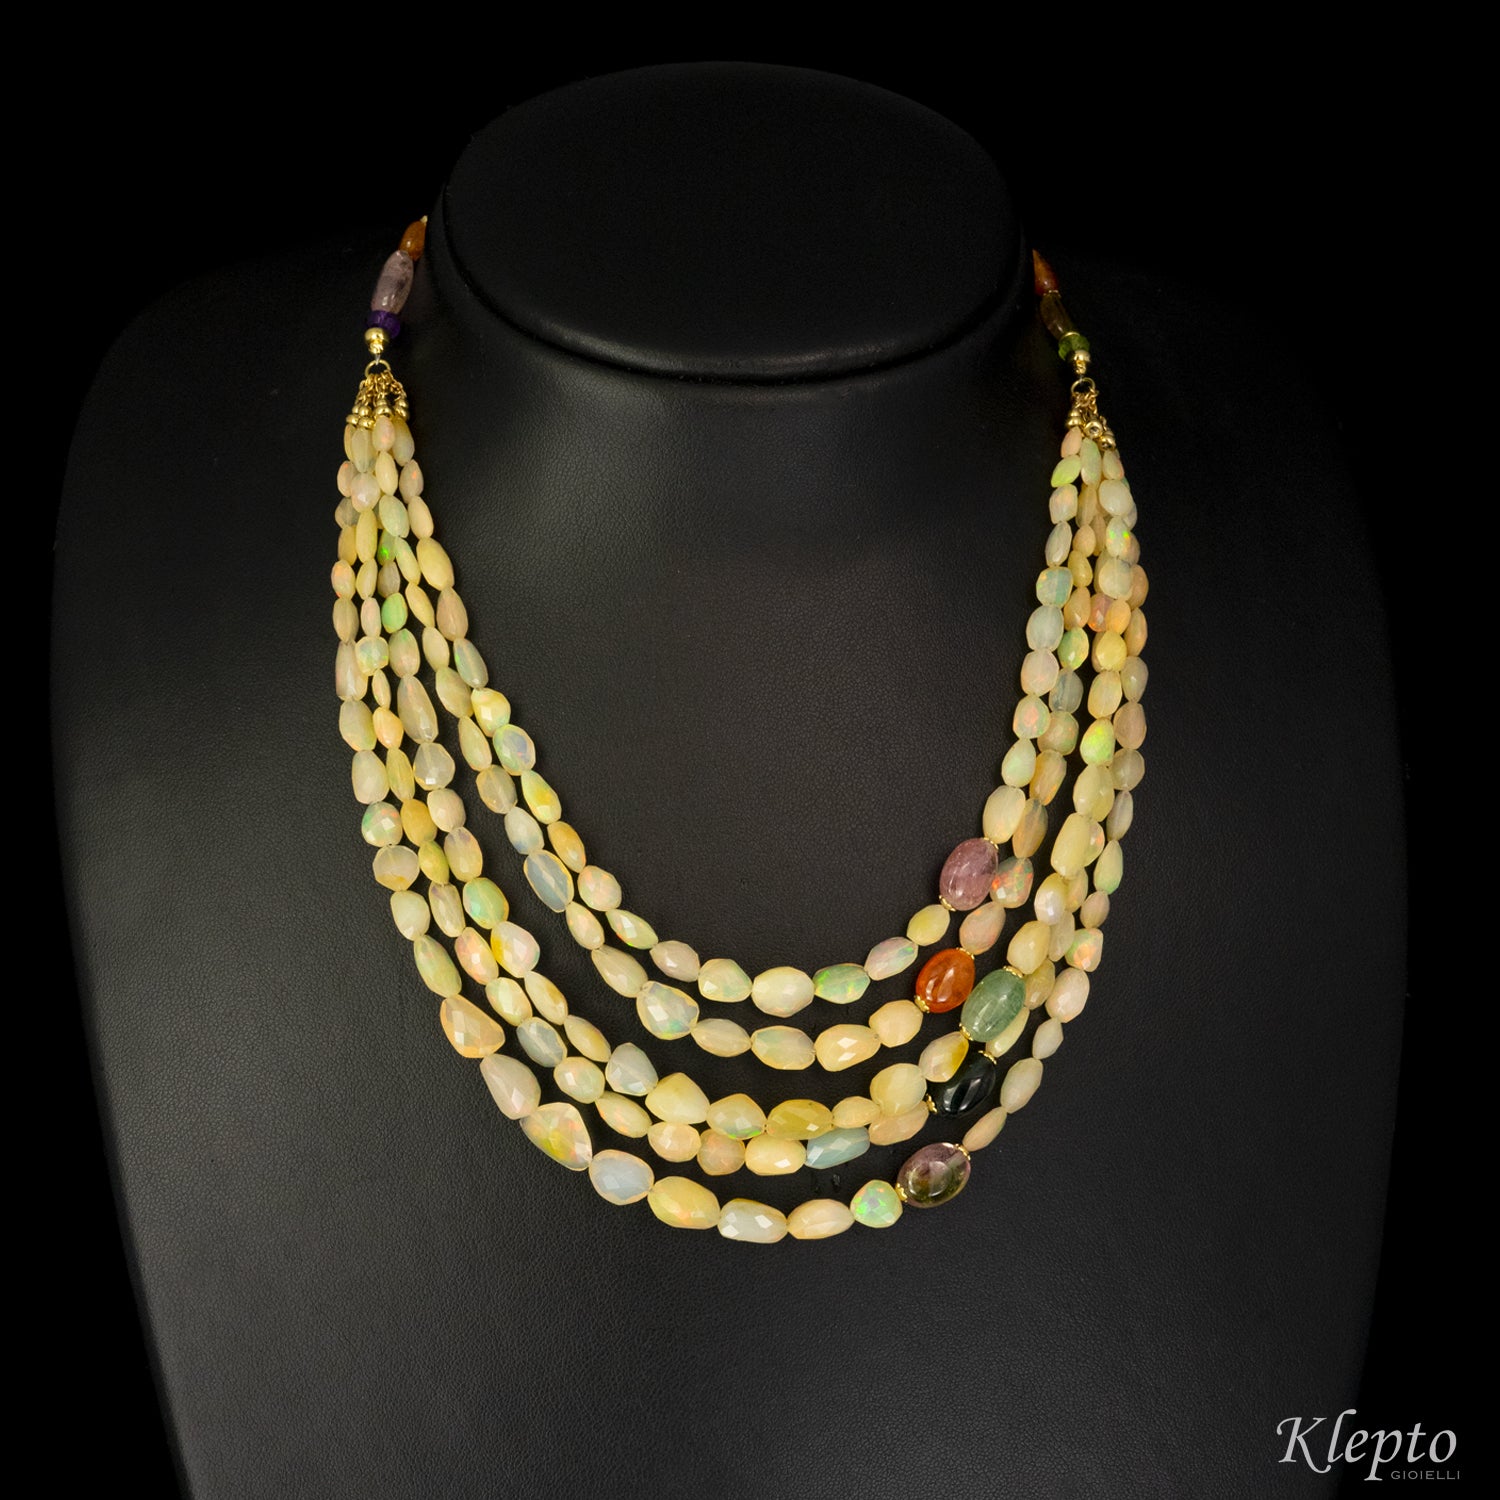 Multi-strand necklace with Opal and Tourmalines